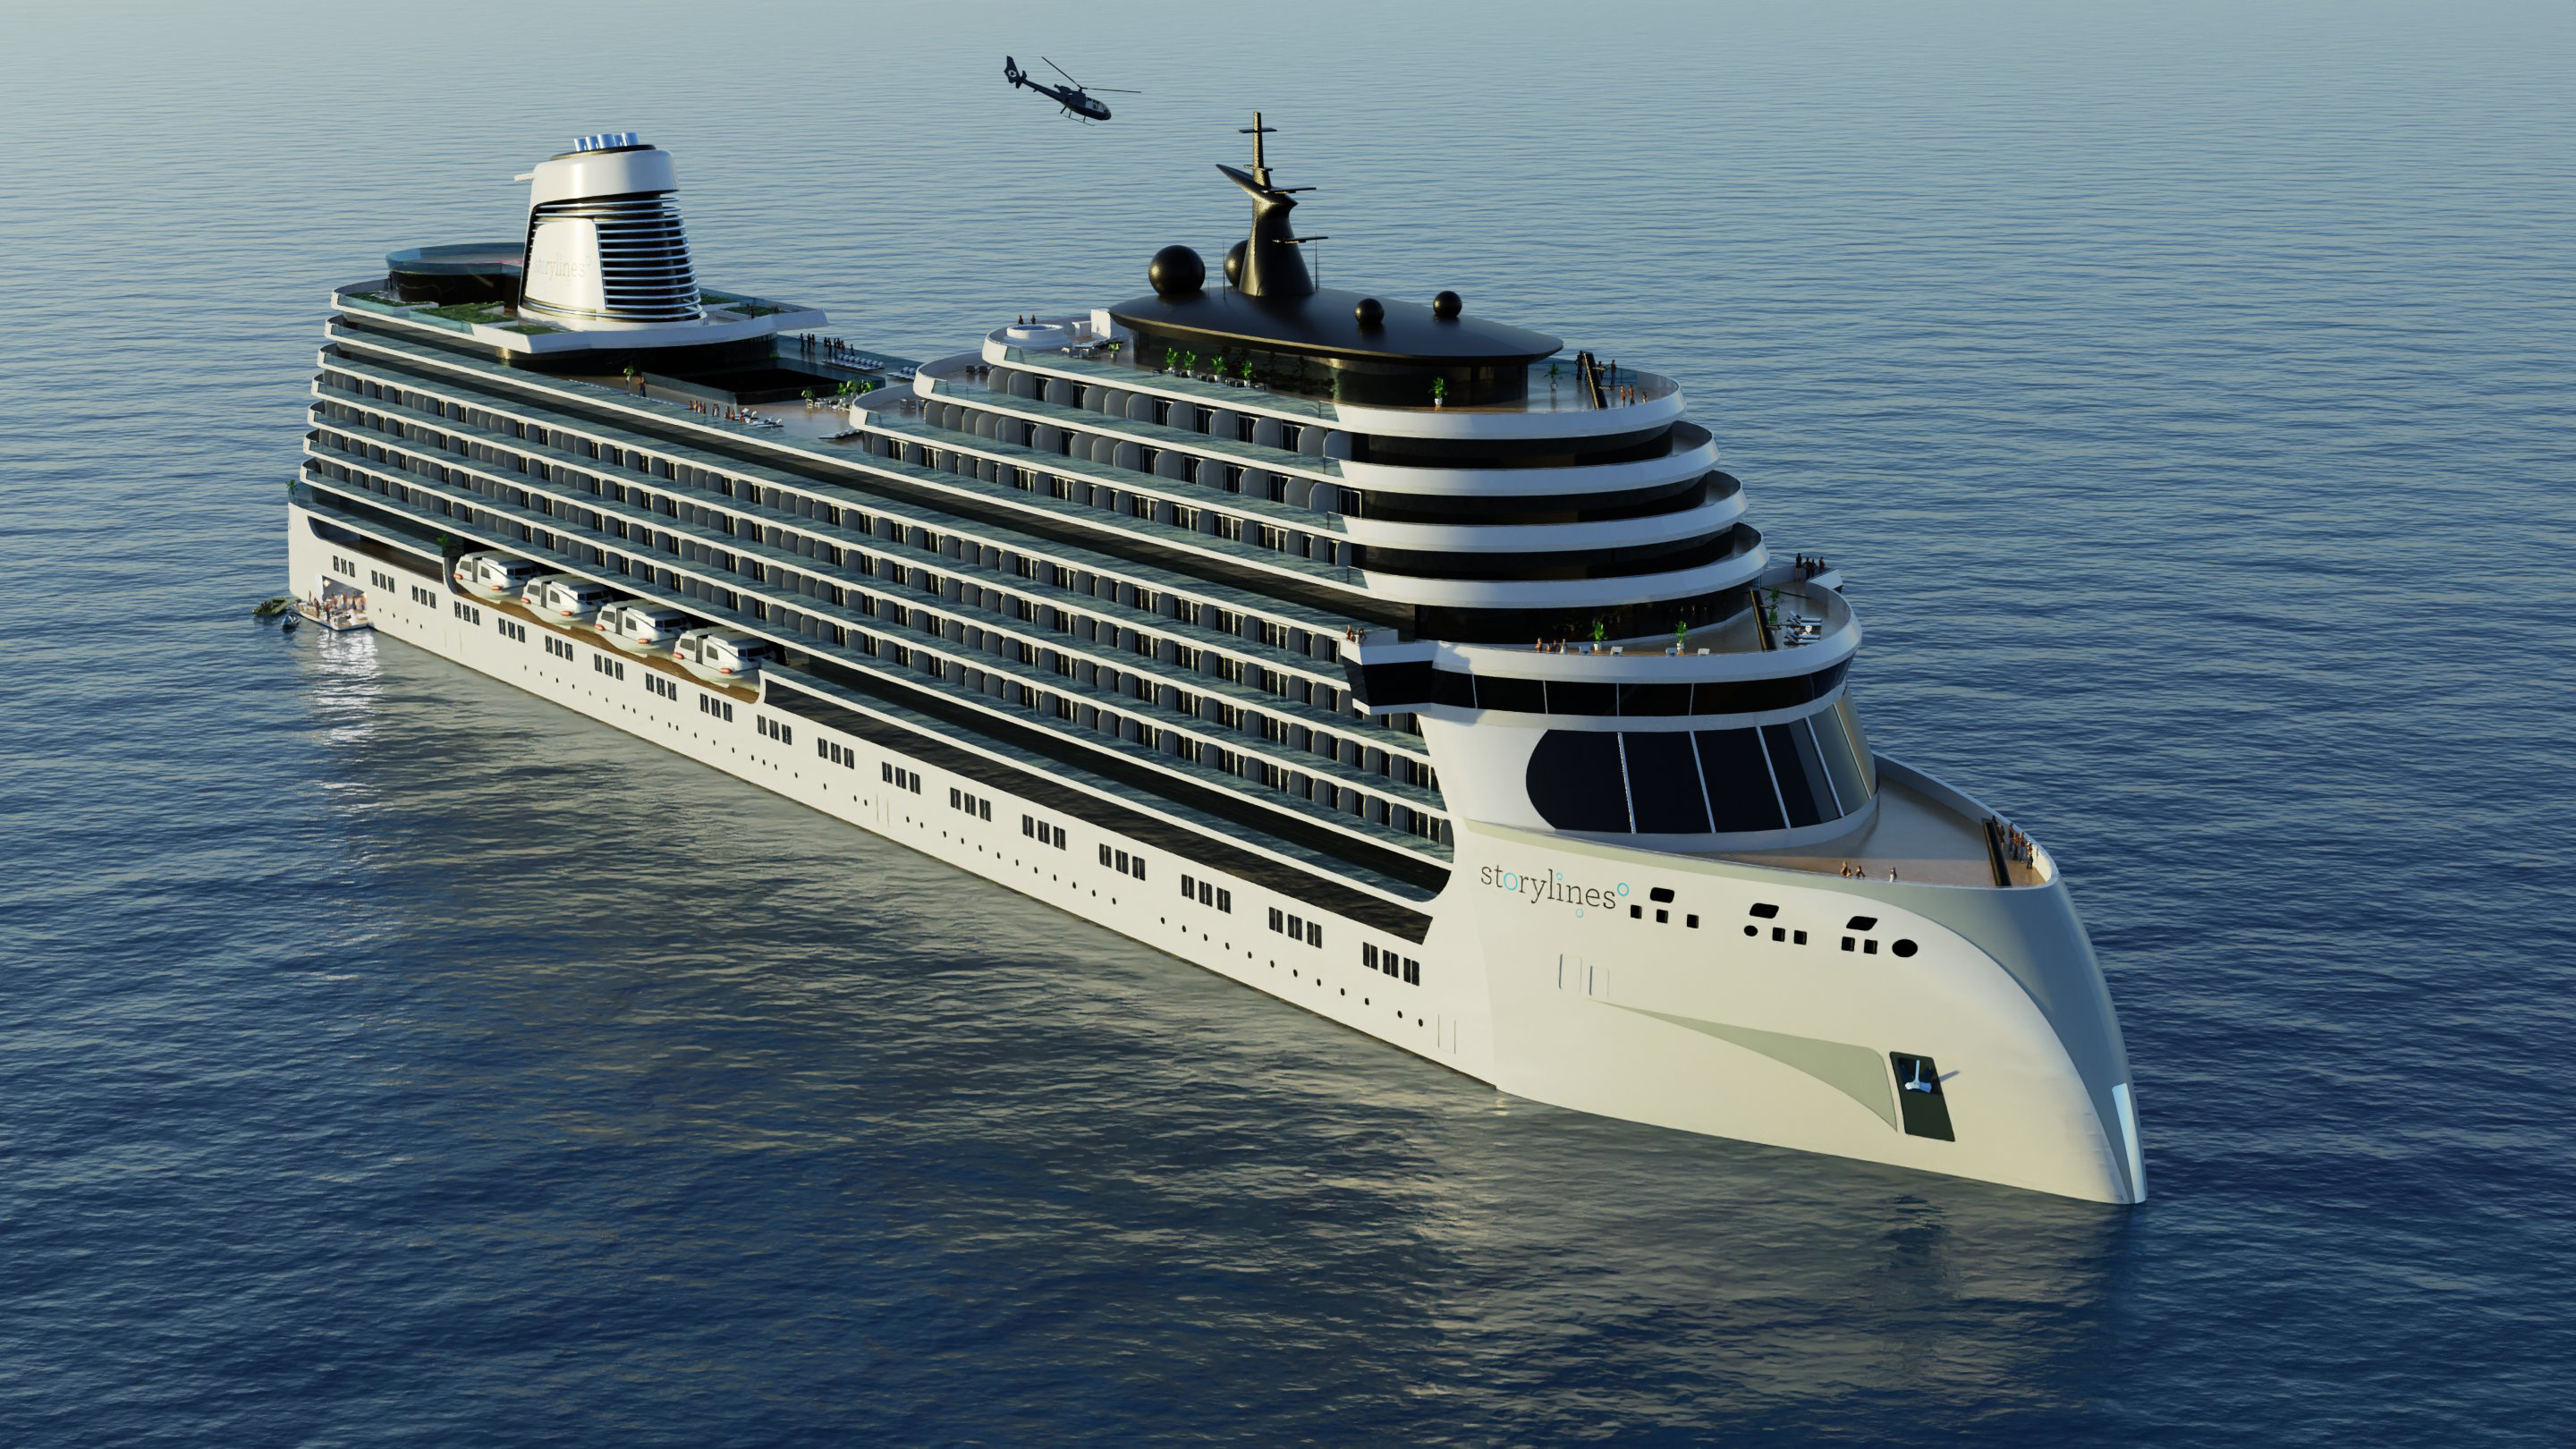 Cruiser (Ship): Storylines luxury residential liner, Transoceanic cruises. 2880x1620 HD Wallpaper.